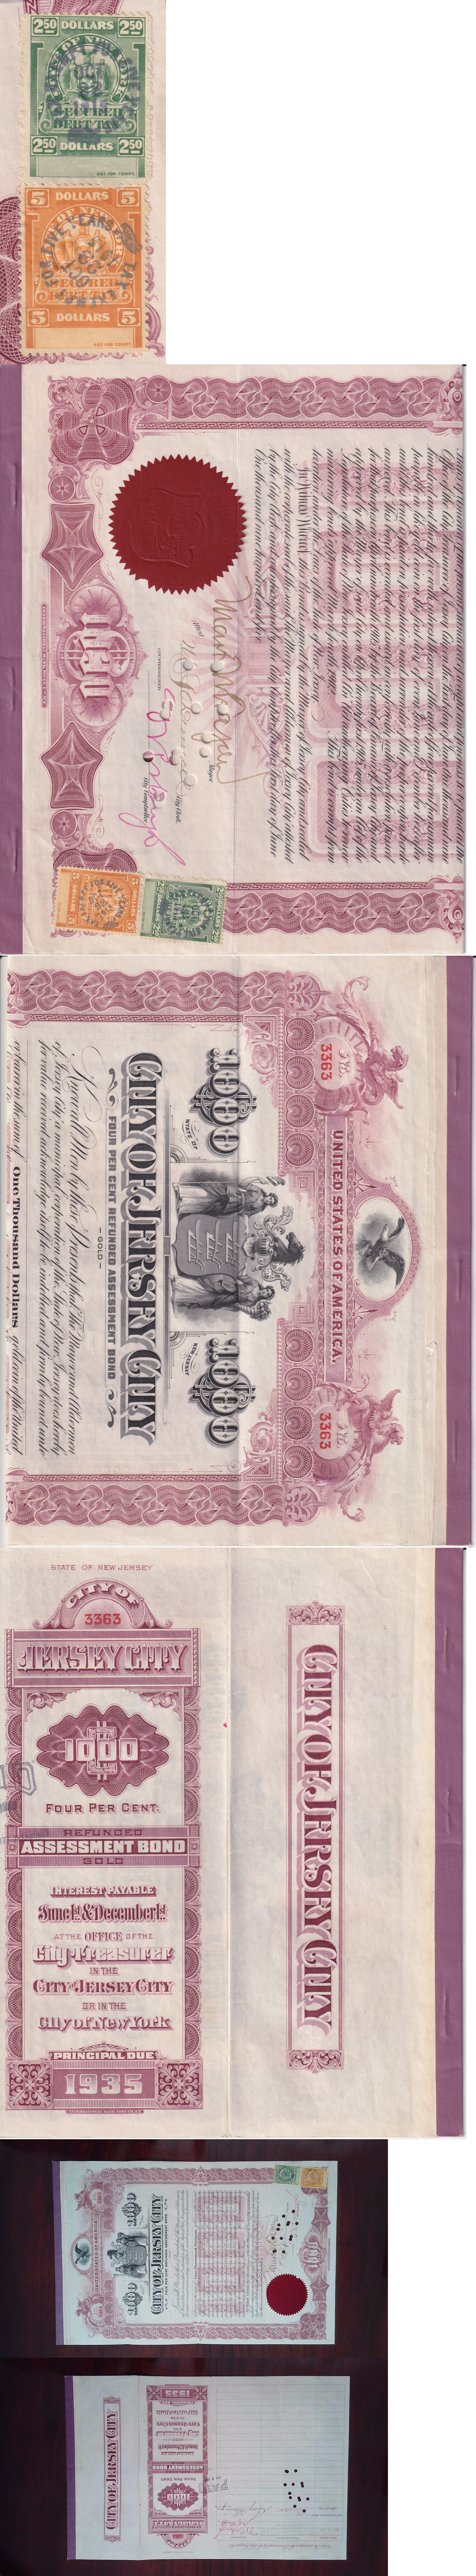 NY secured debt SCD5, SCD6 $2.50, $5 U F-VF, on 1905 $1000 City of Jersey City Refund Assessment bond. Tax exempt five years, Oct 22 1915 (3 line date stamp.) WP